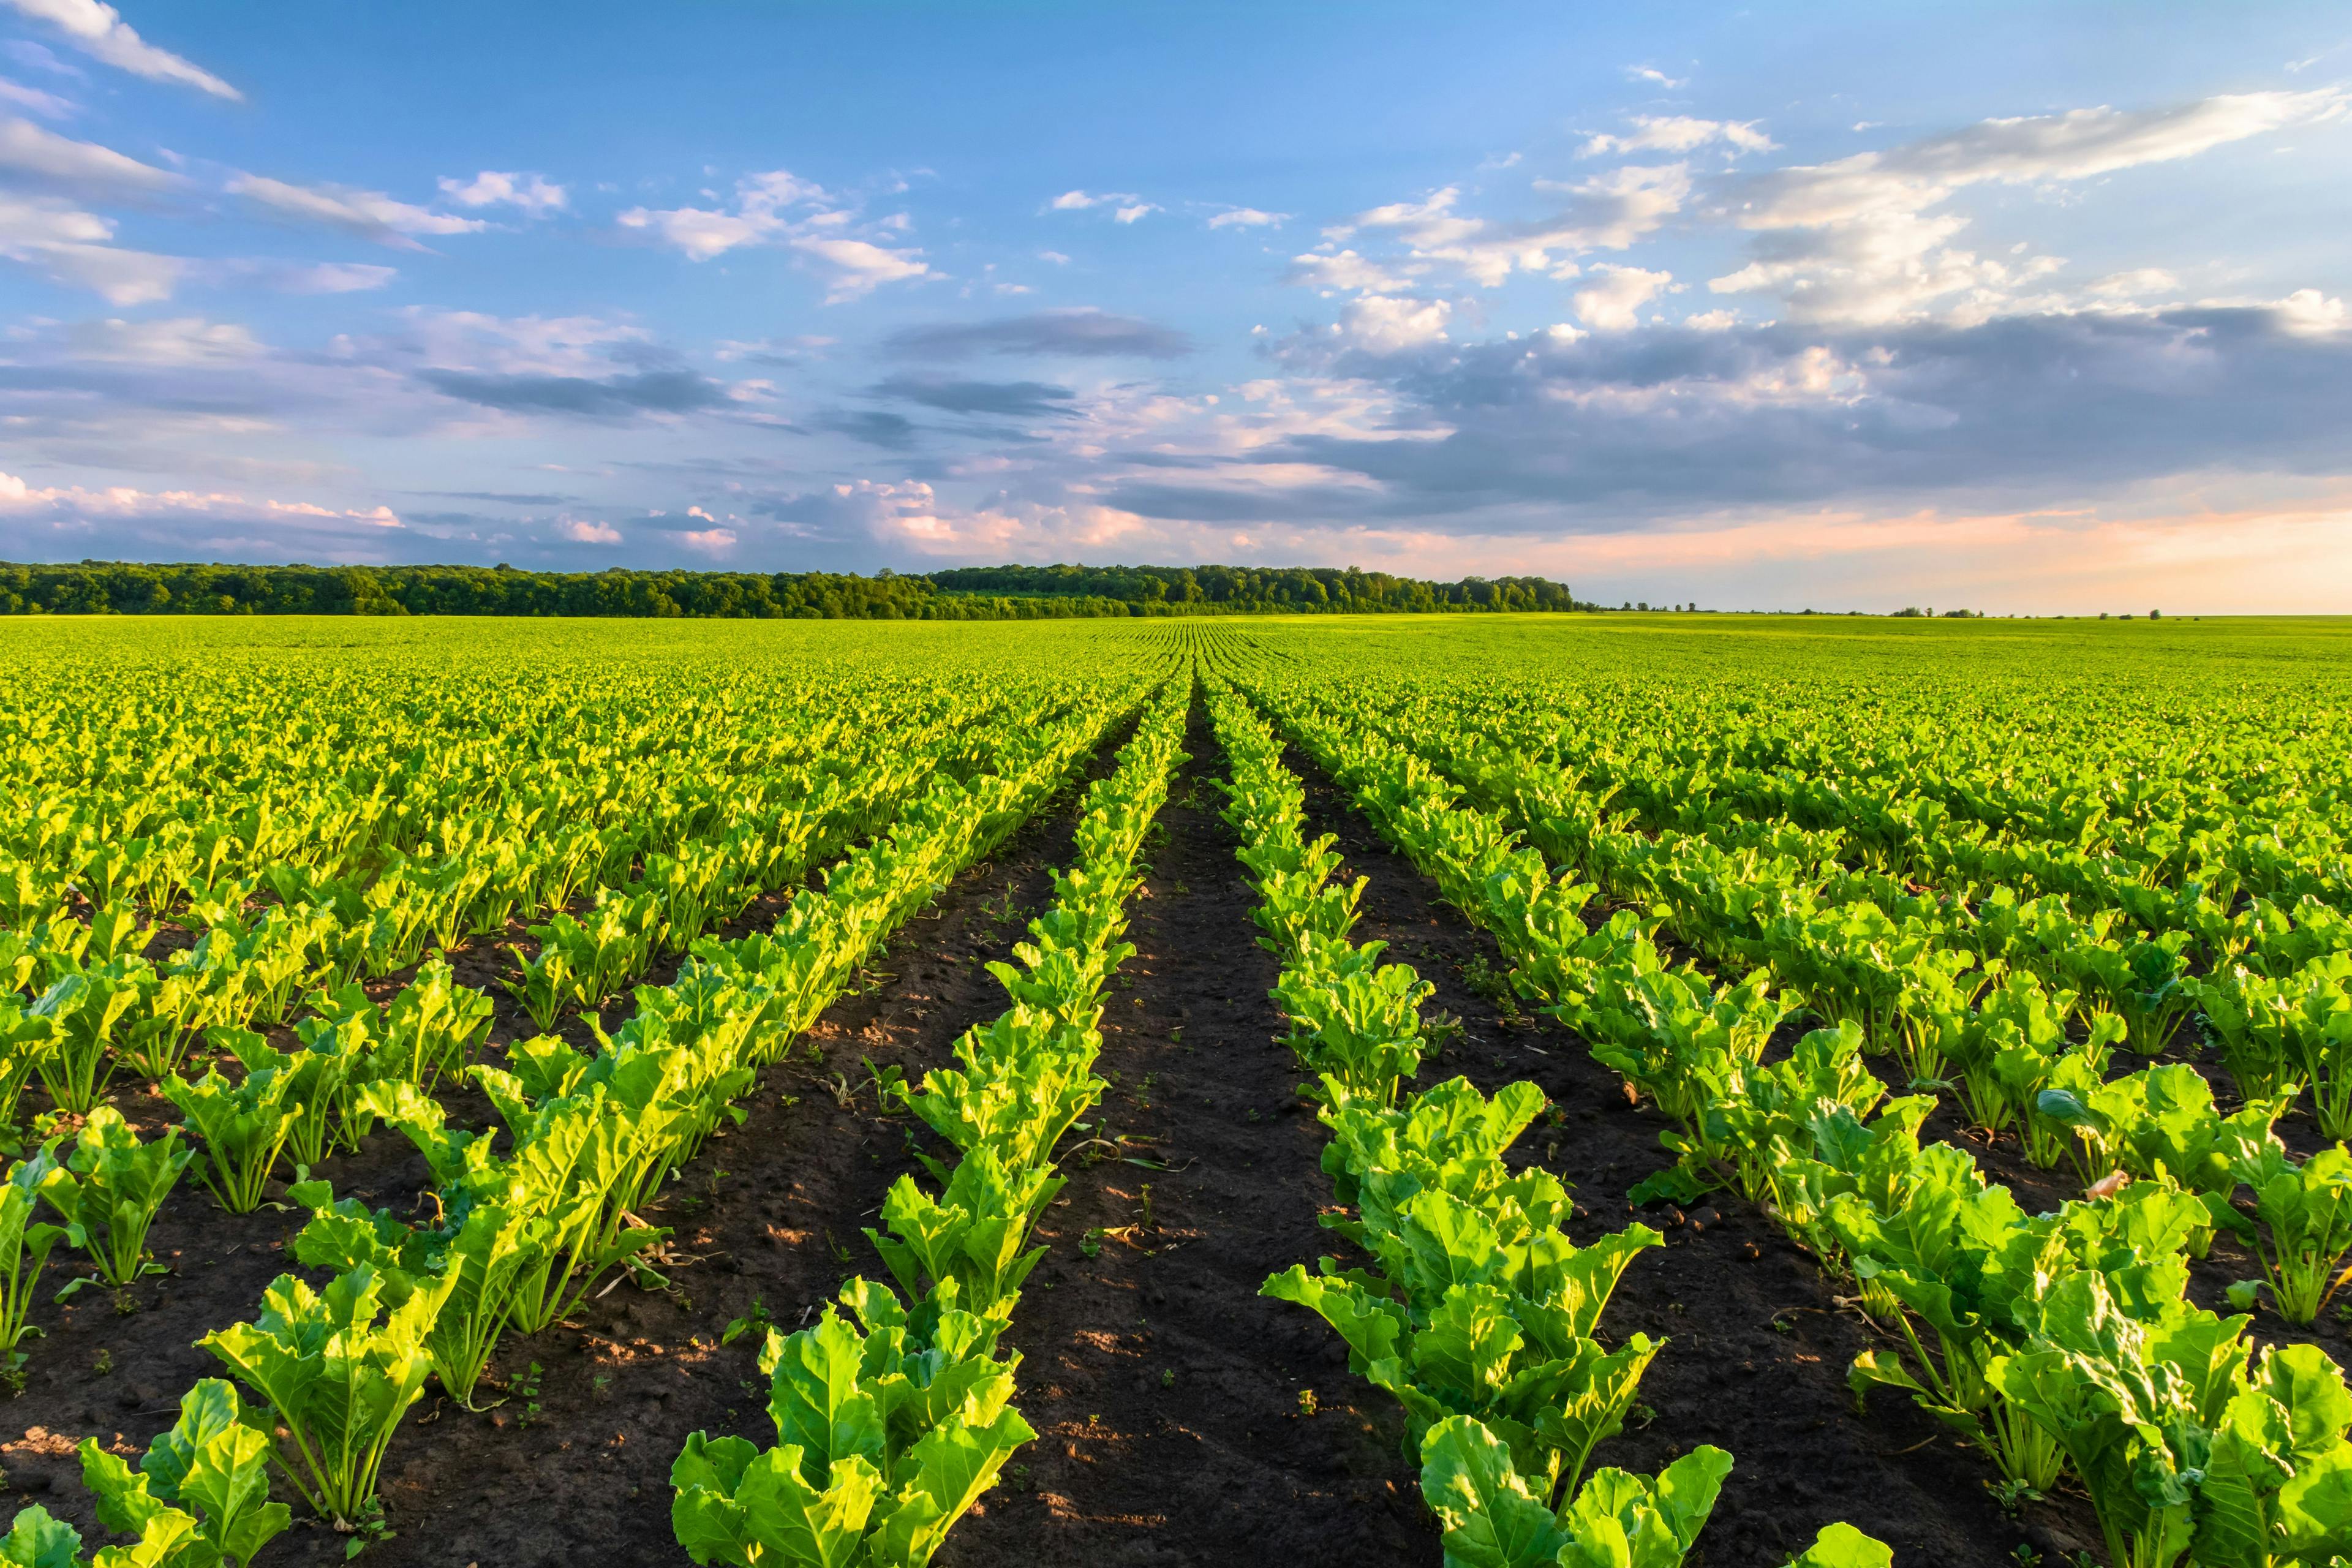 Sugar beets grow in rows on plantations | Image Credit: © physyk - stock.adobe.com.